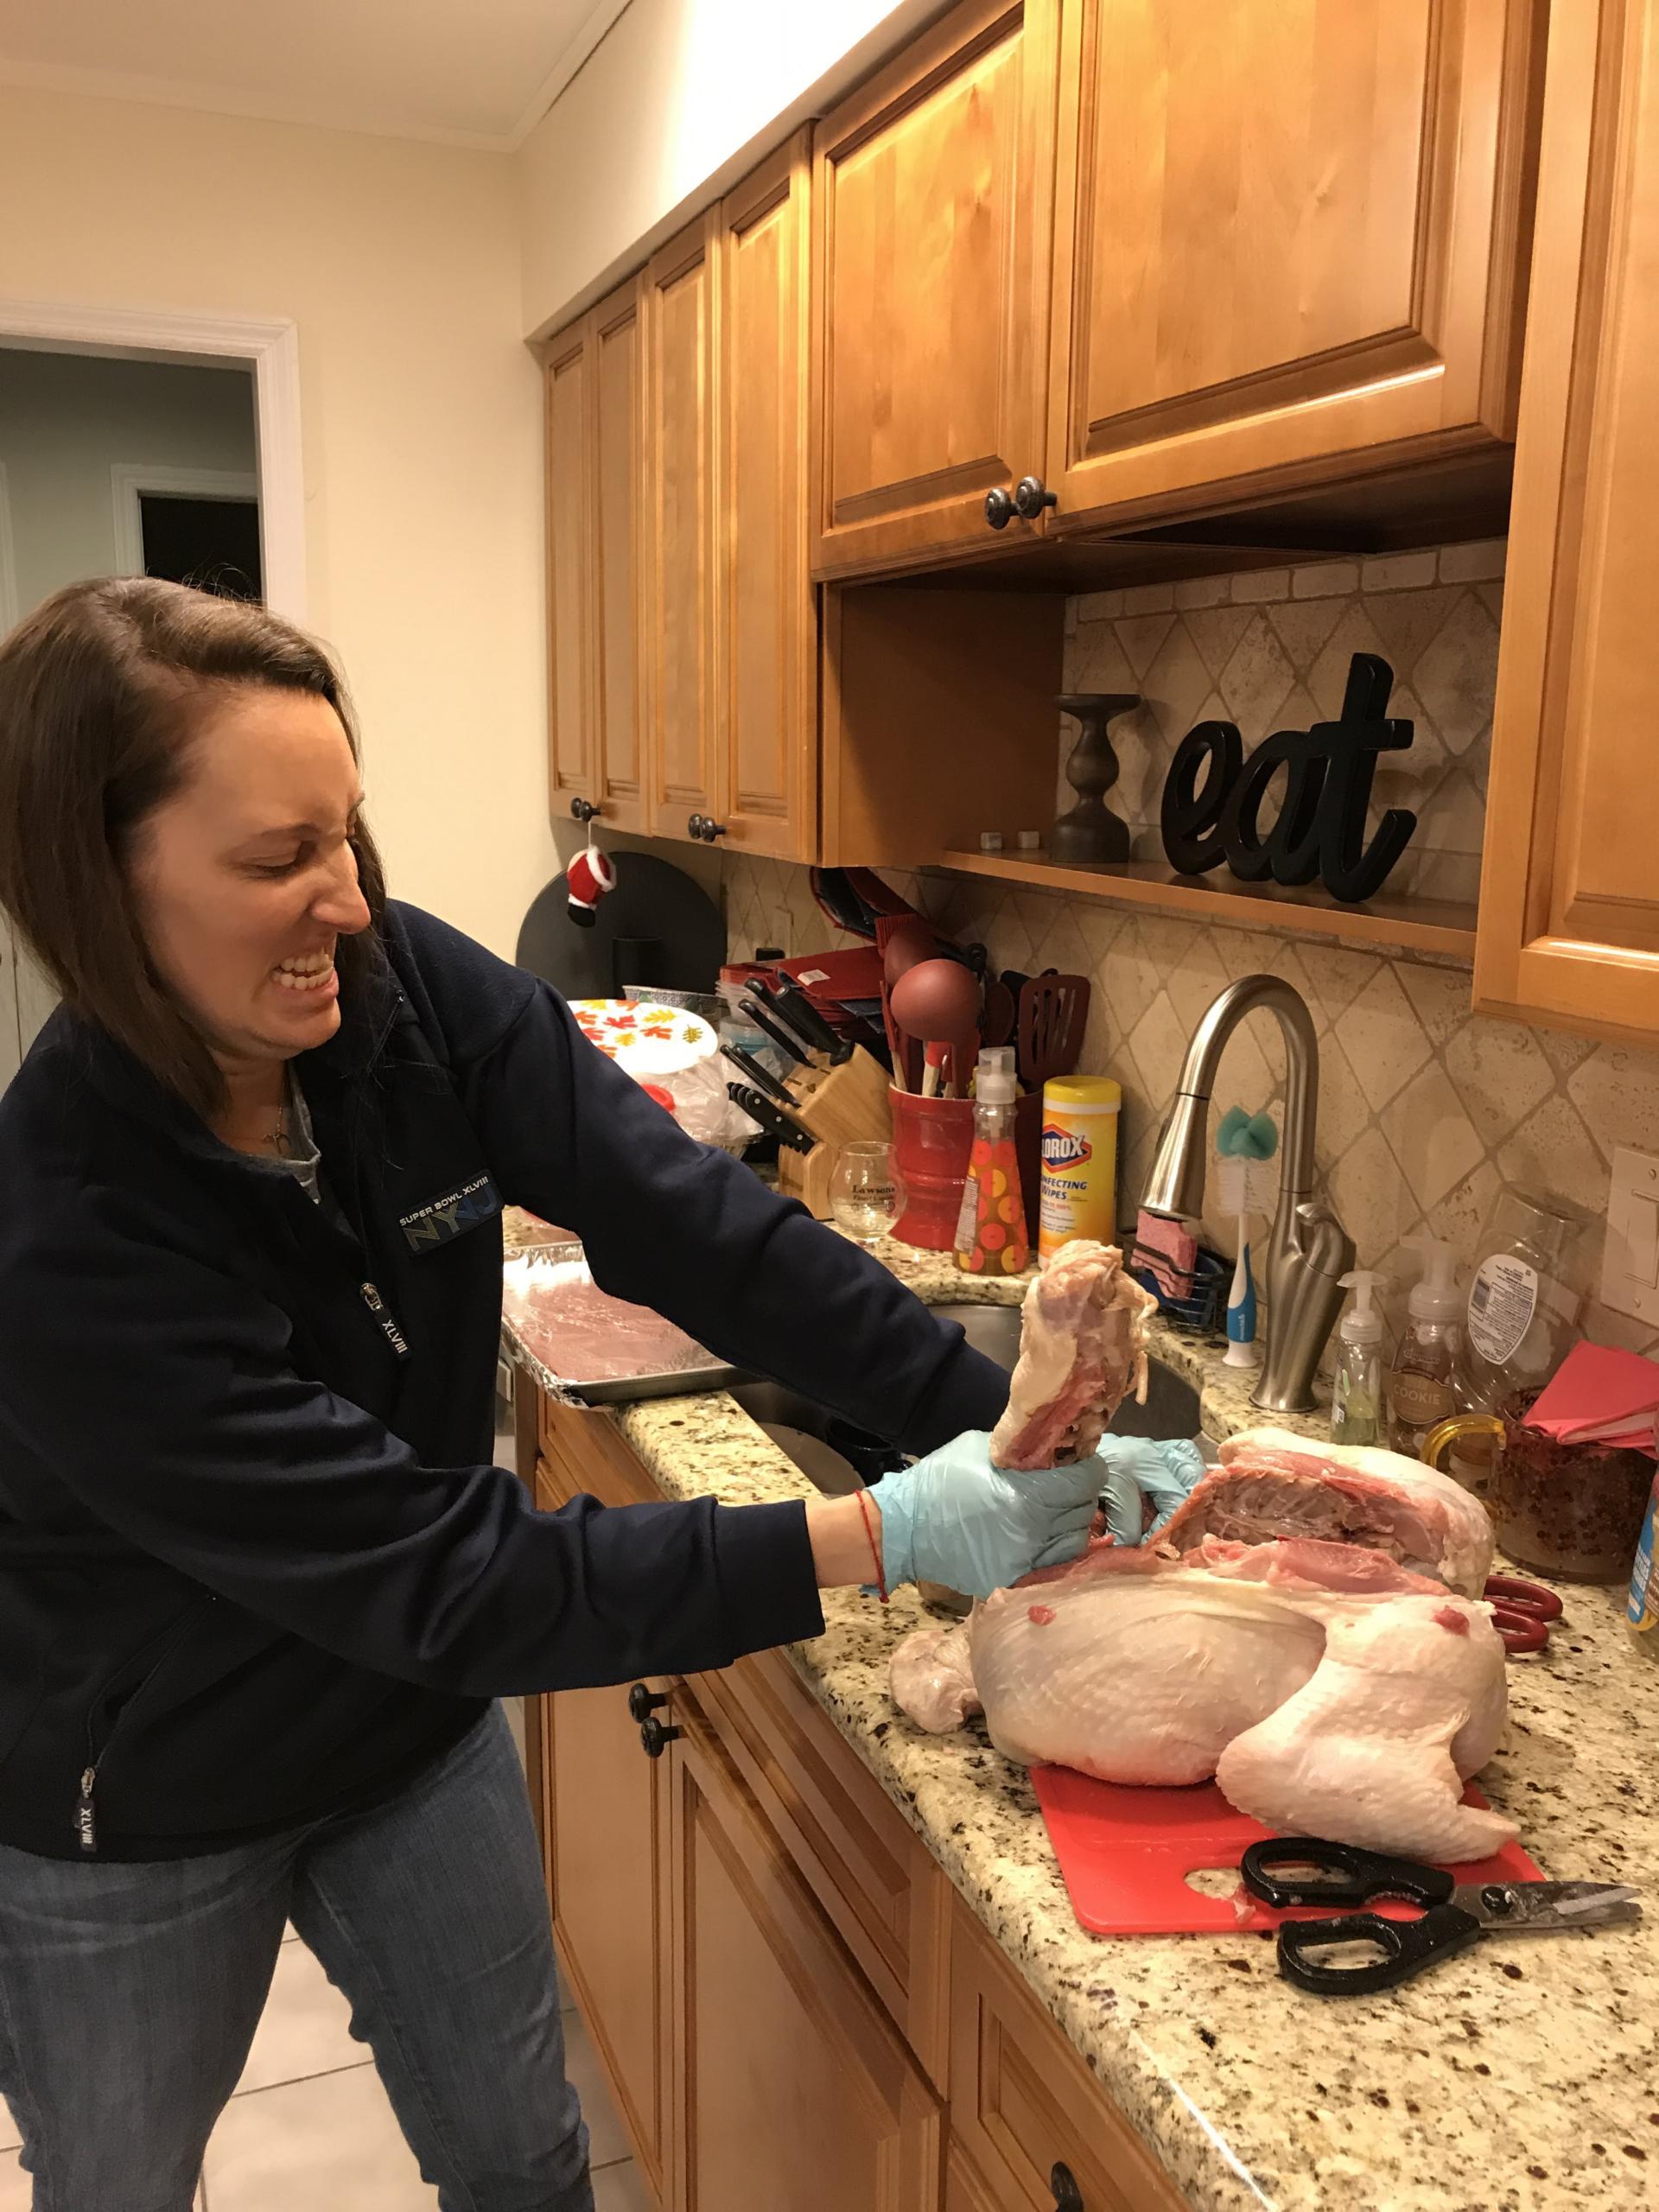 CELEBRATE: Friendsgiving and a Roasted Spatchcock Turkey by New Jersey foodie blogger What's For Dinner Esq.